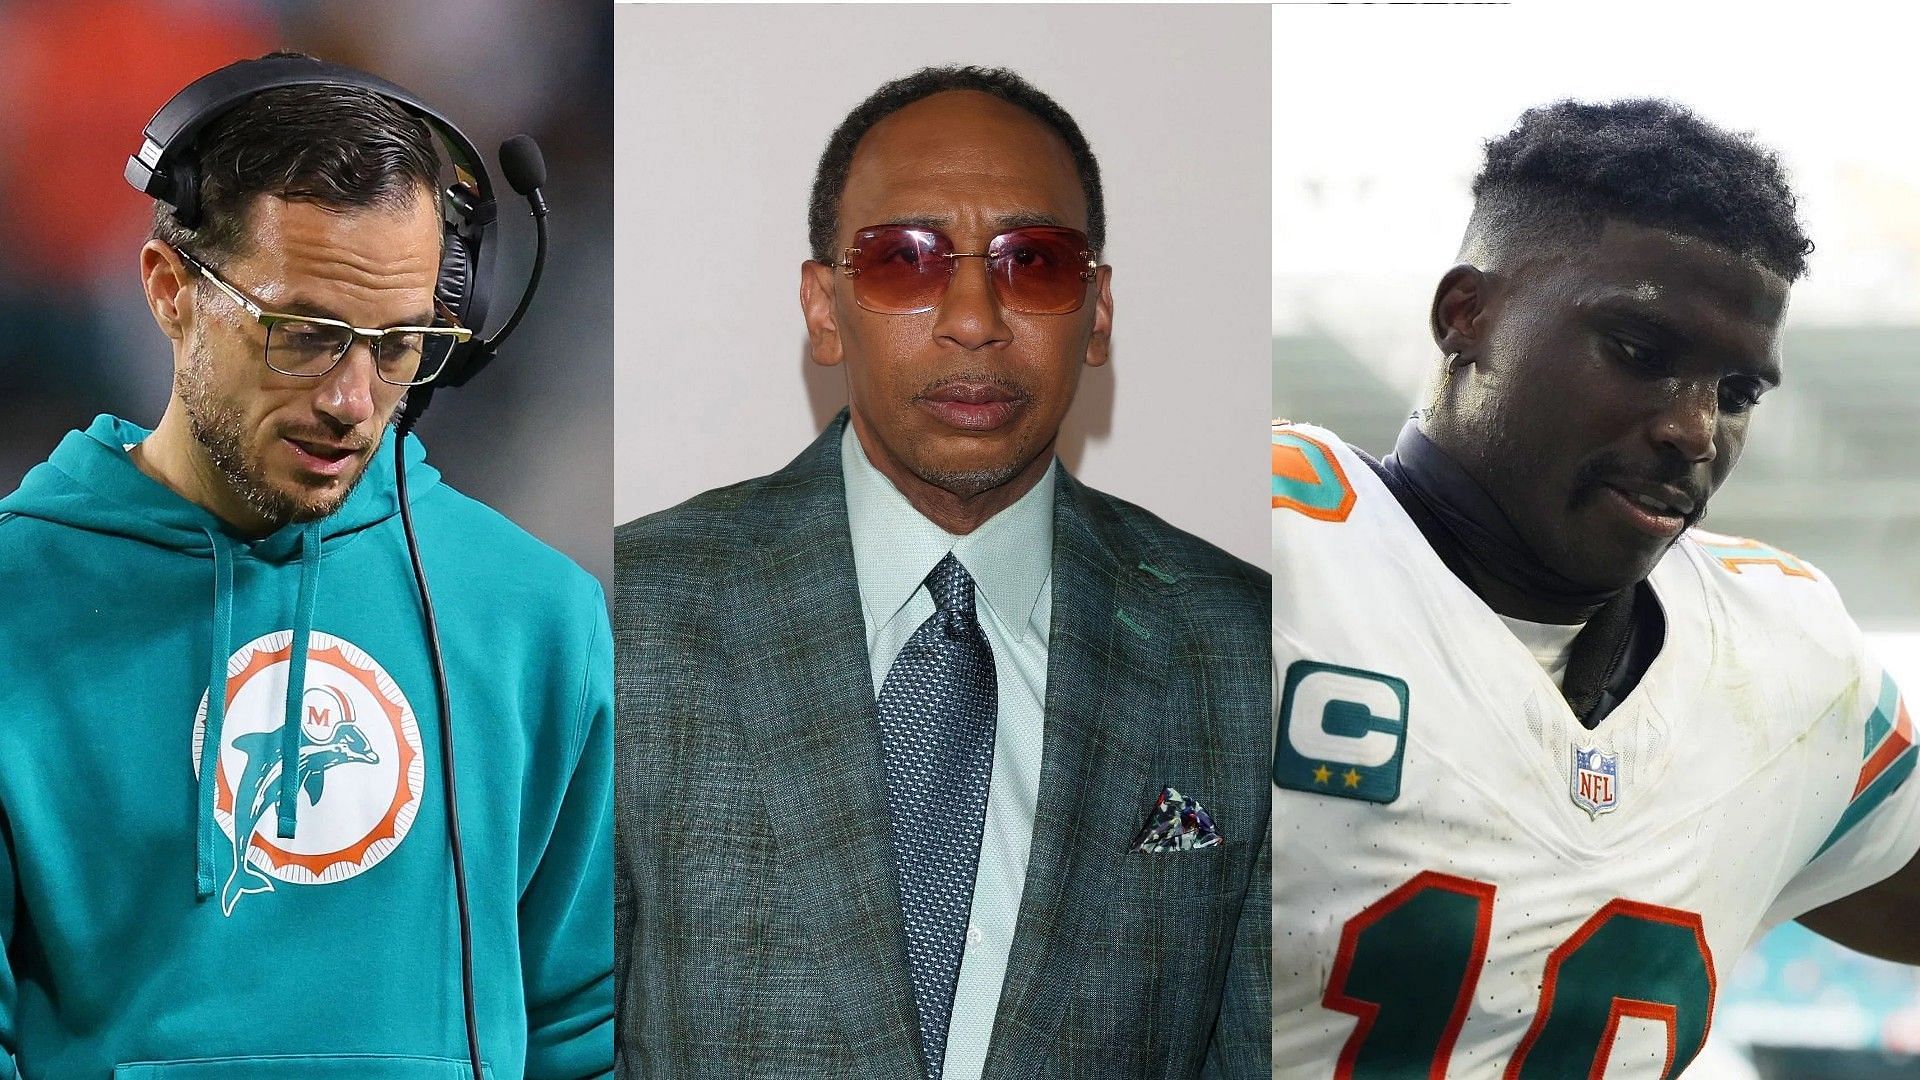 Stephen A. Smith calls out Tyreek Hill and &ldquo;boy genius&rdquo; Mike McDaniel as Dolphins &ldquo;wet the bed&rdquo;